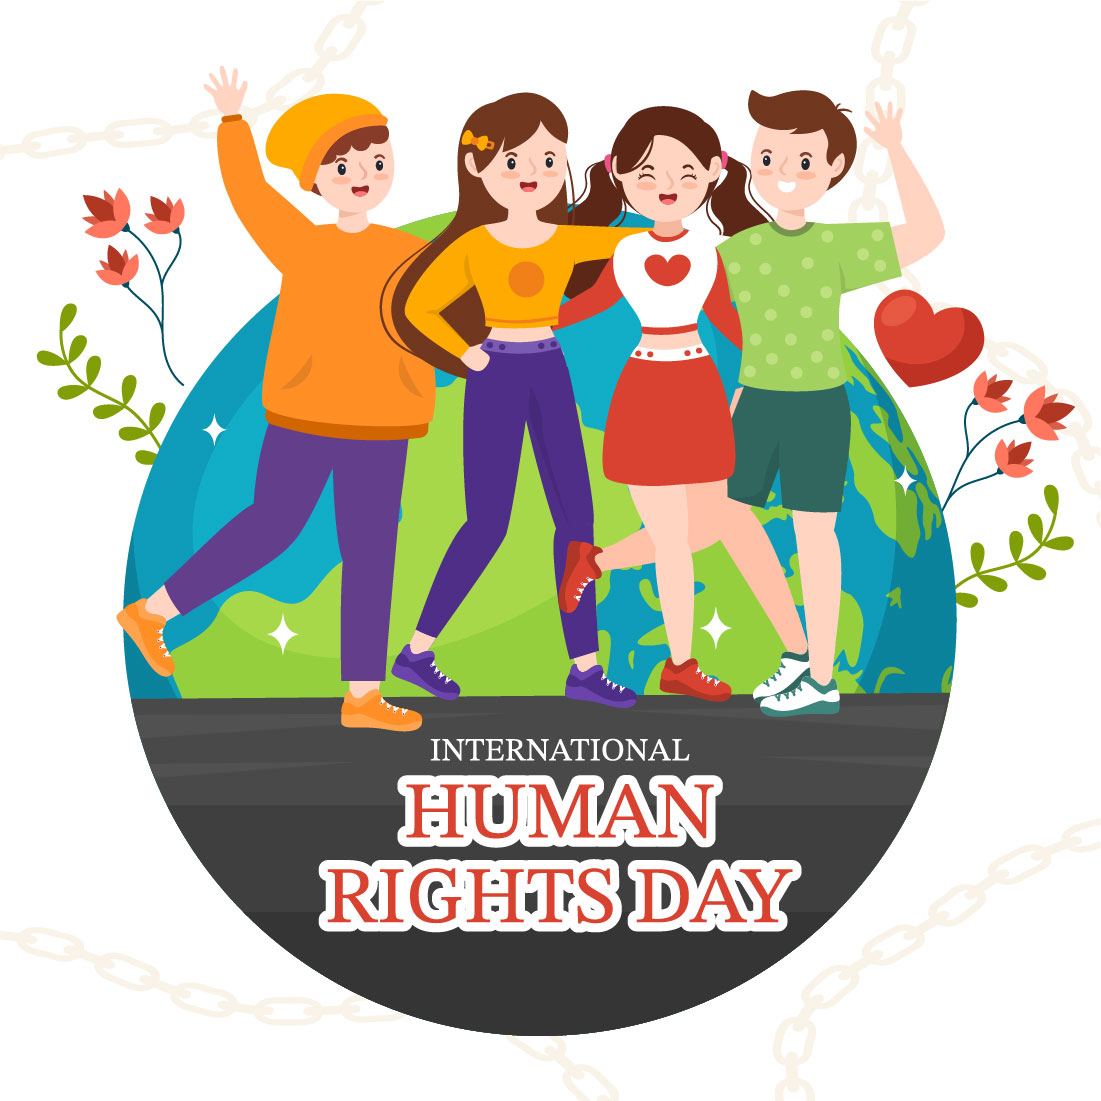 12 International Human Rights Day Illustration cover image.